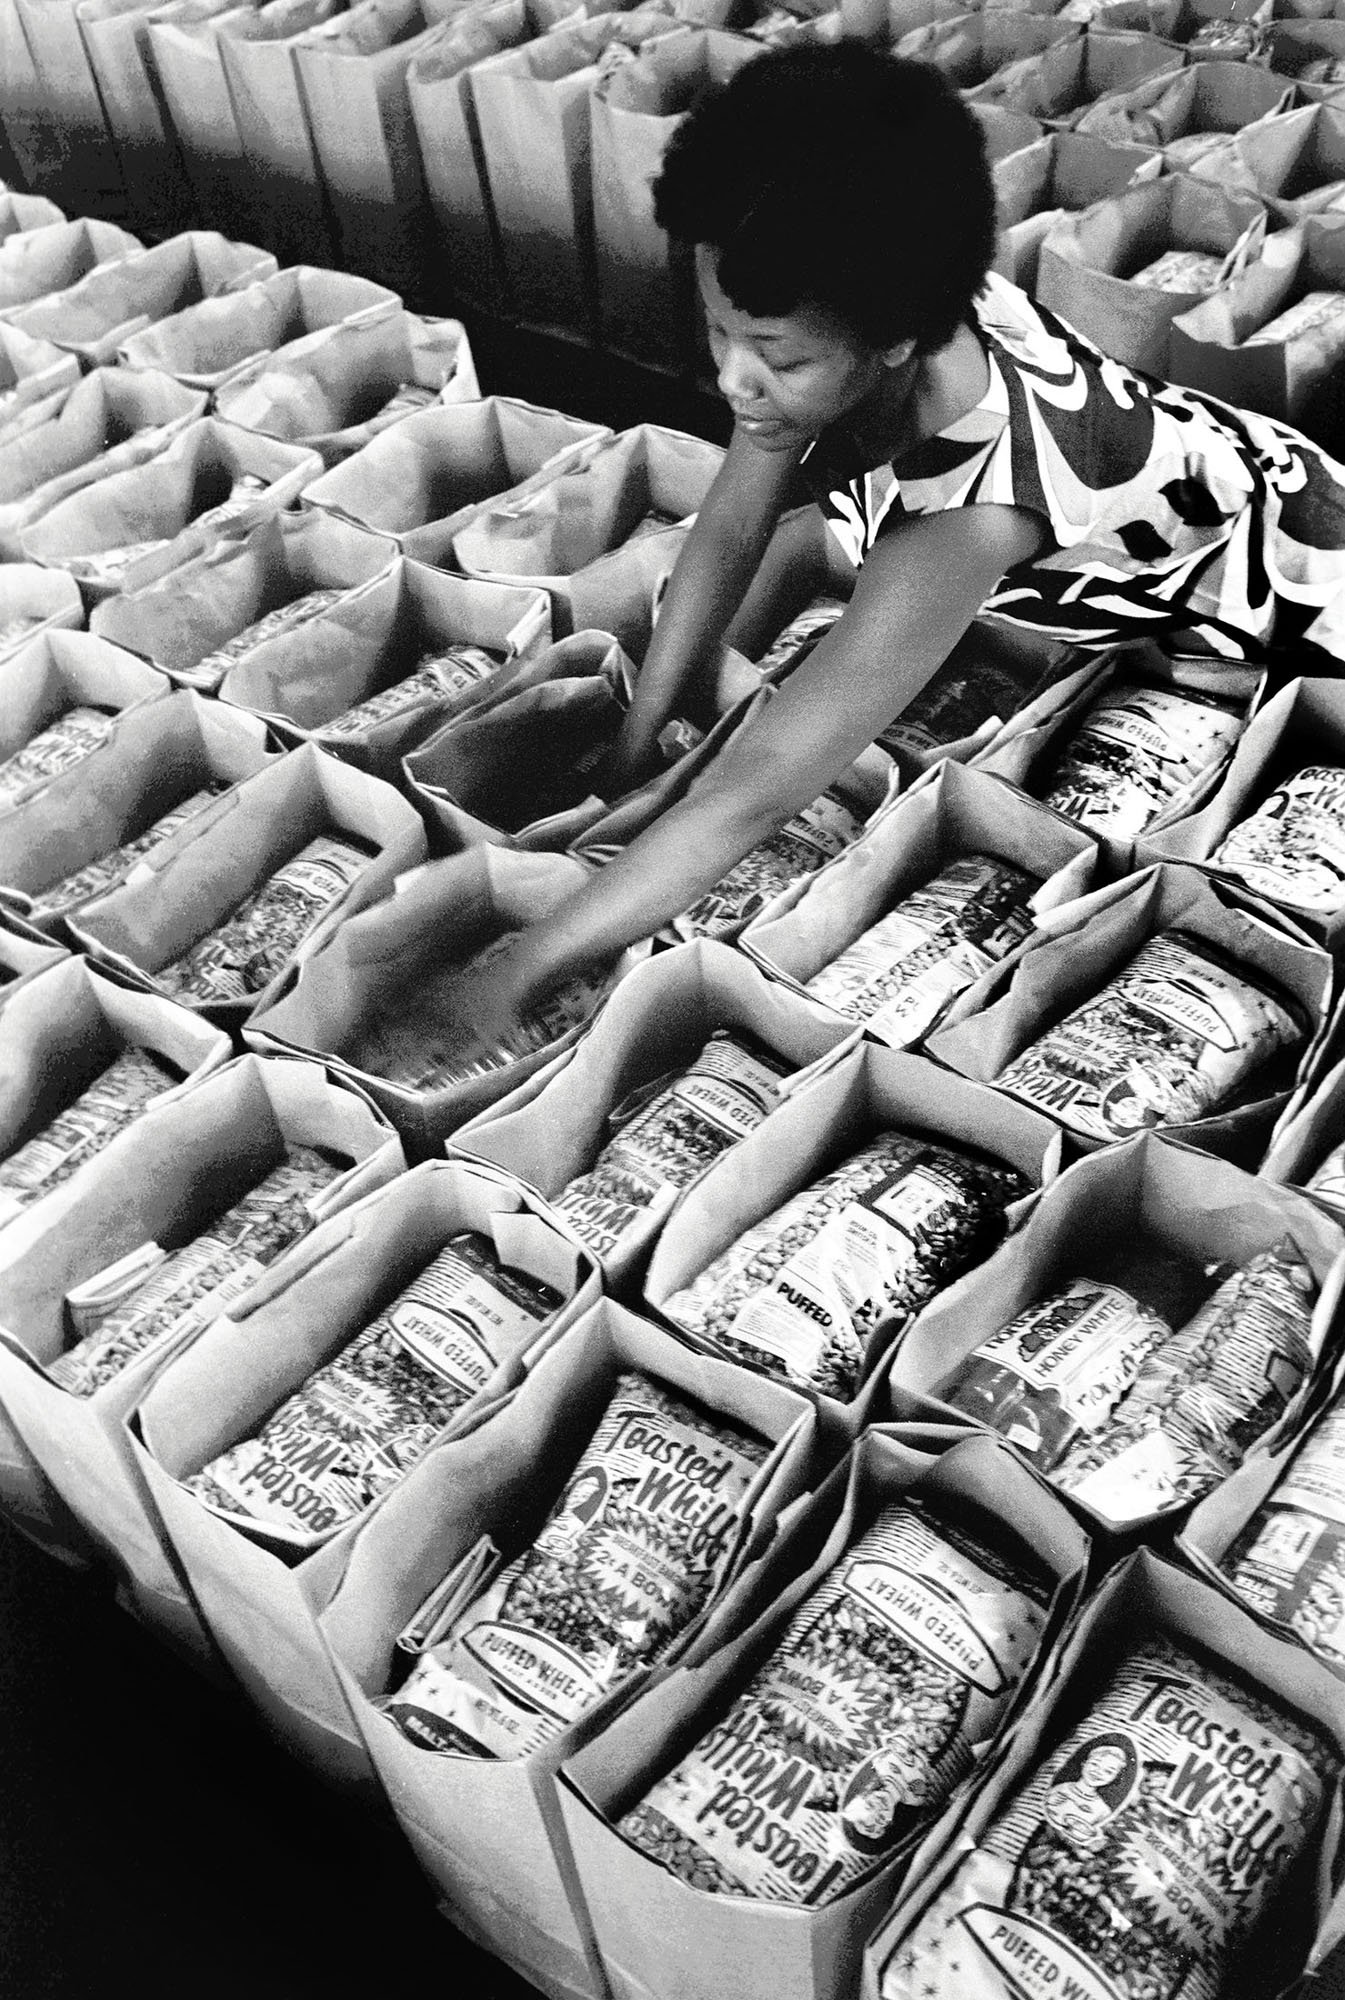 March, 197 2 - Oakland, California: Panther Free Food Program. Earlene Coleman, Black Panther Party member prepares bags of food for distribution at the Laney College student center for the Black Panther Community Survival Conference at the Oakland Coliseum where the Panthers gave away 6,000 bags of groceries. Bobby Seale announced his run for Mayor of Oakland that night.